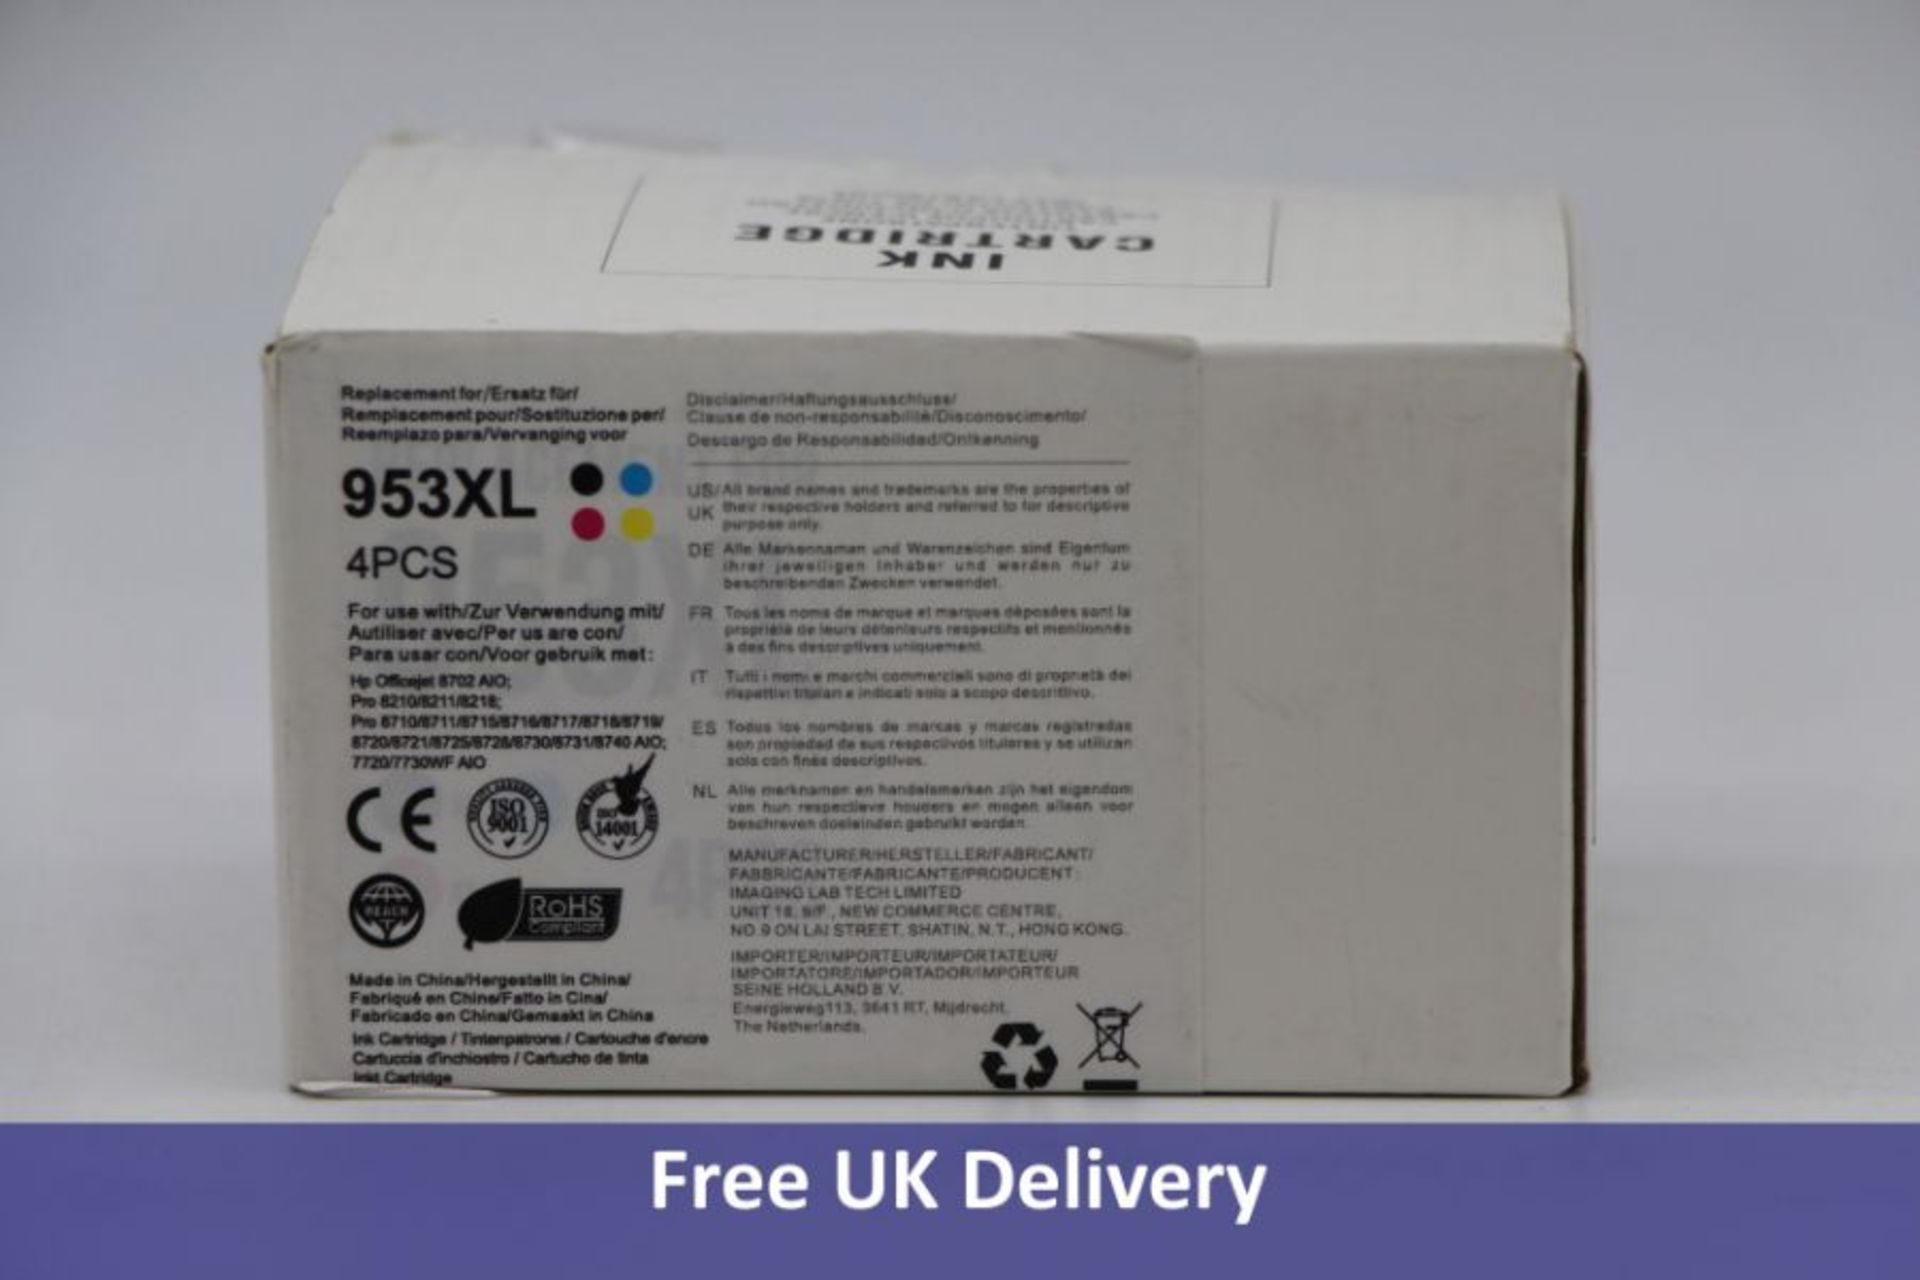 HP Ink Cartridge 953XL Updated Chip, Four Pieces to include Cyan, Magenta, Black and Yellow